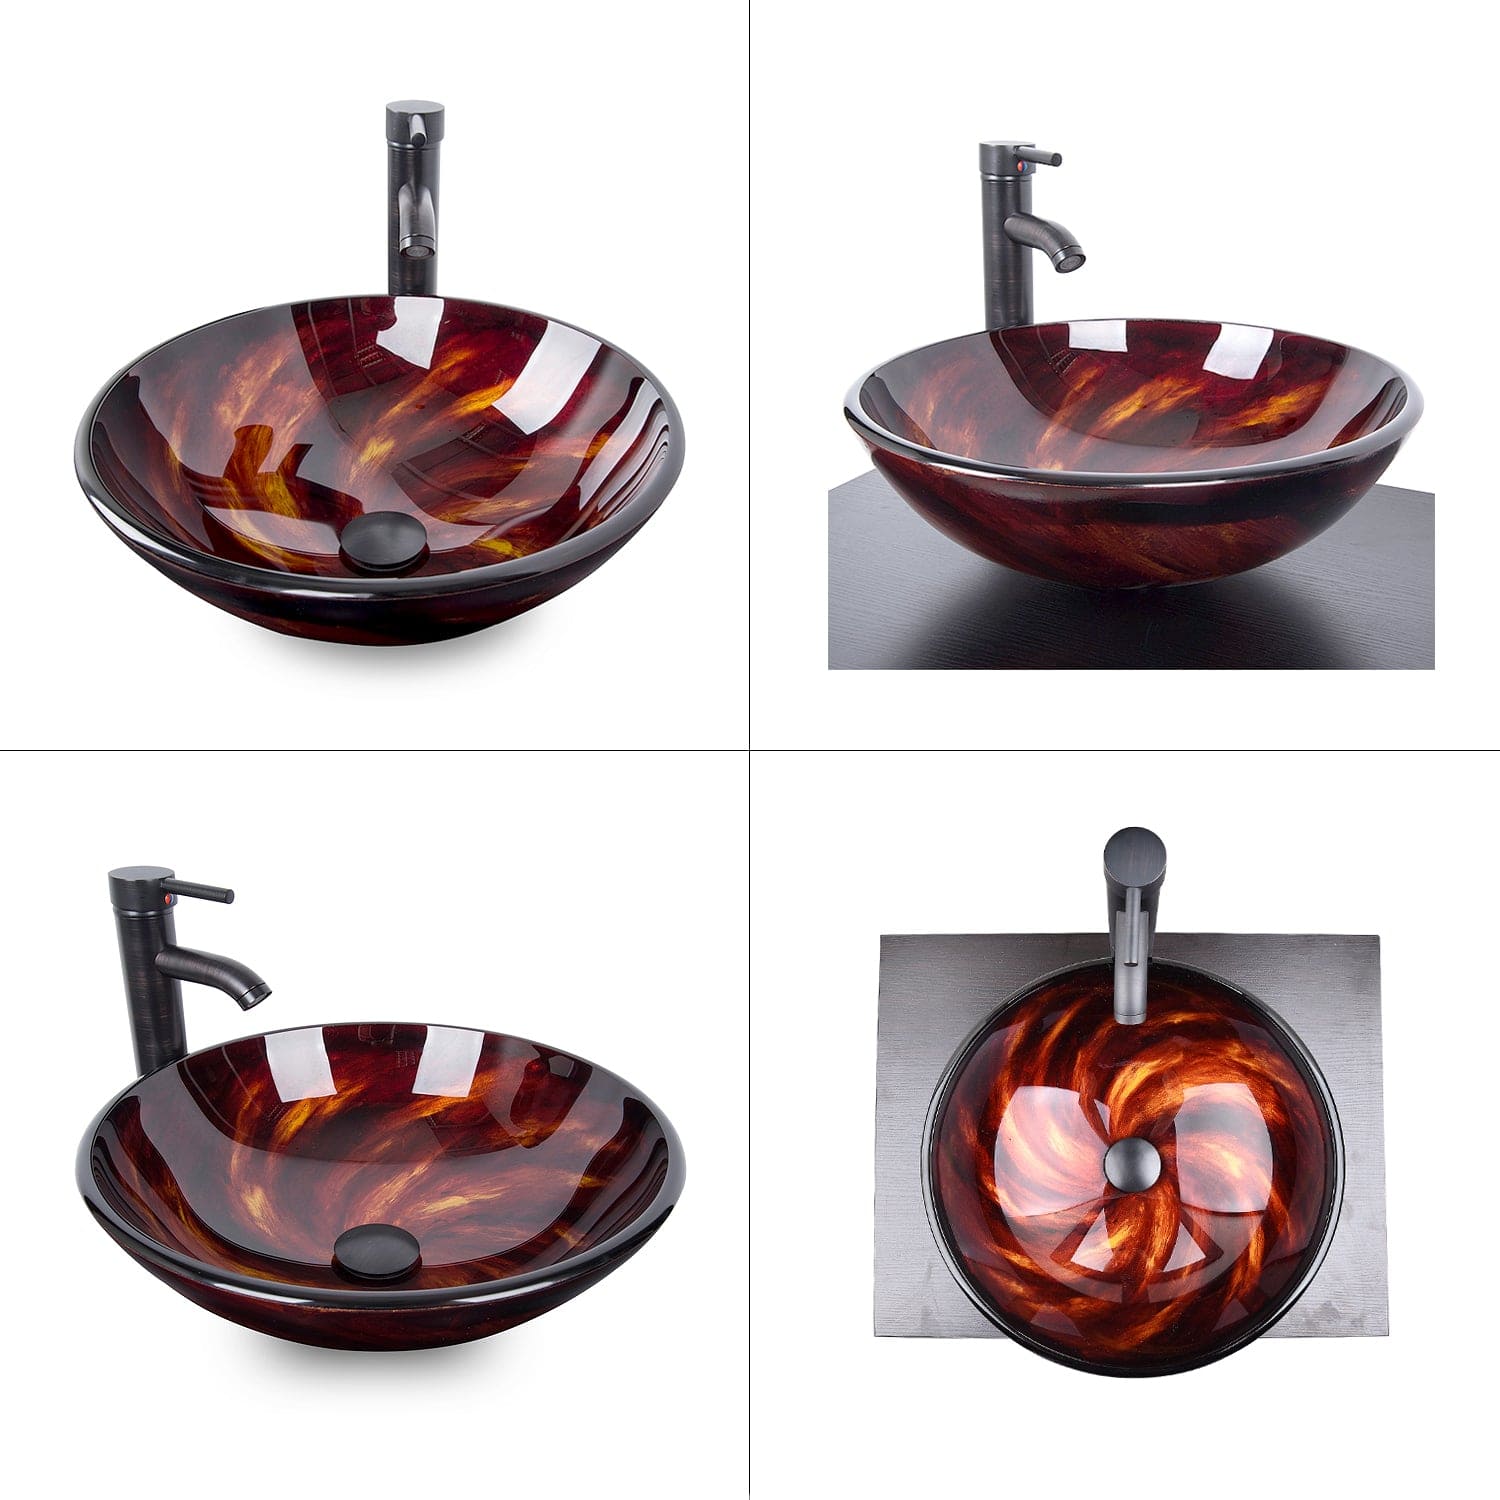 Four angle views of Elecwish Flame Red Round Sink